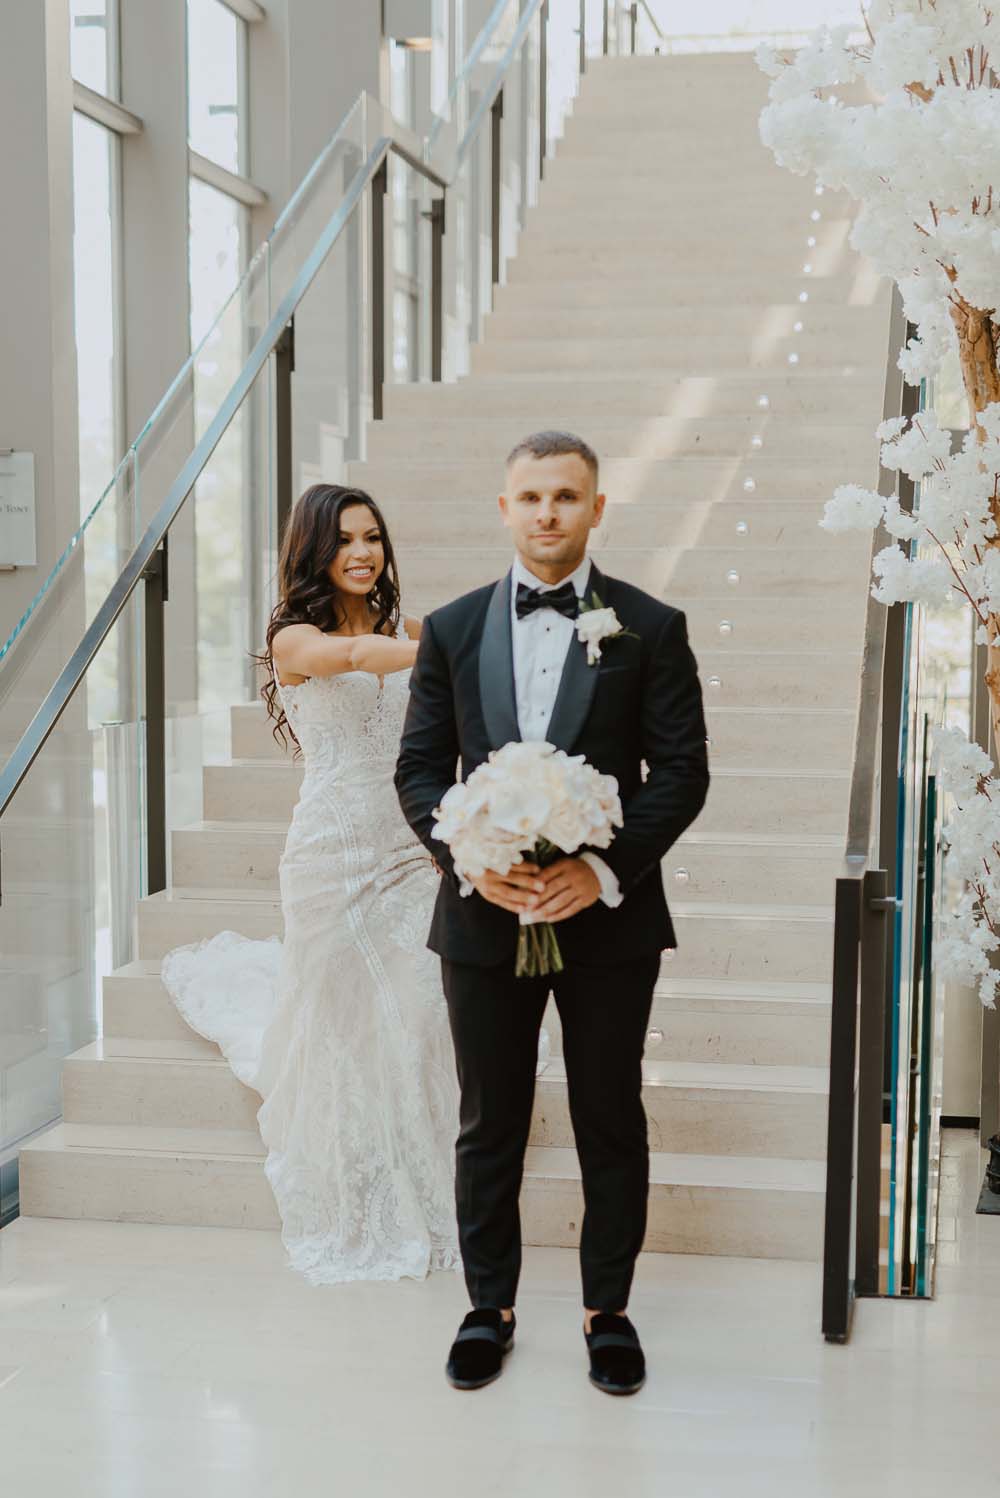 An Opulent Wedding At The Royal Conservatory Of Music - first look